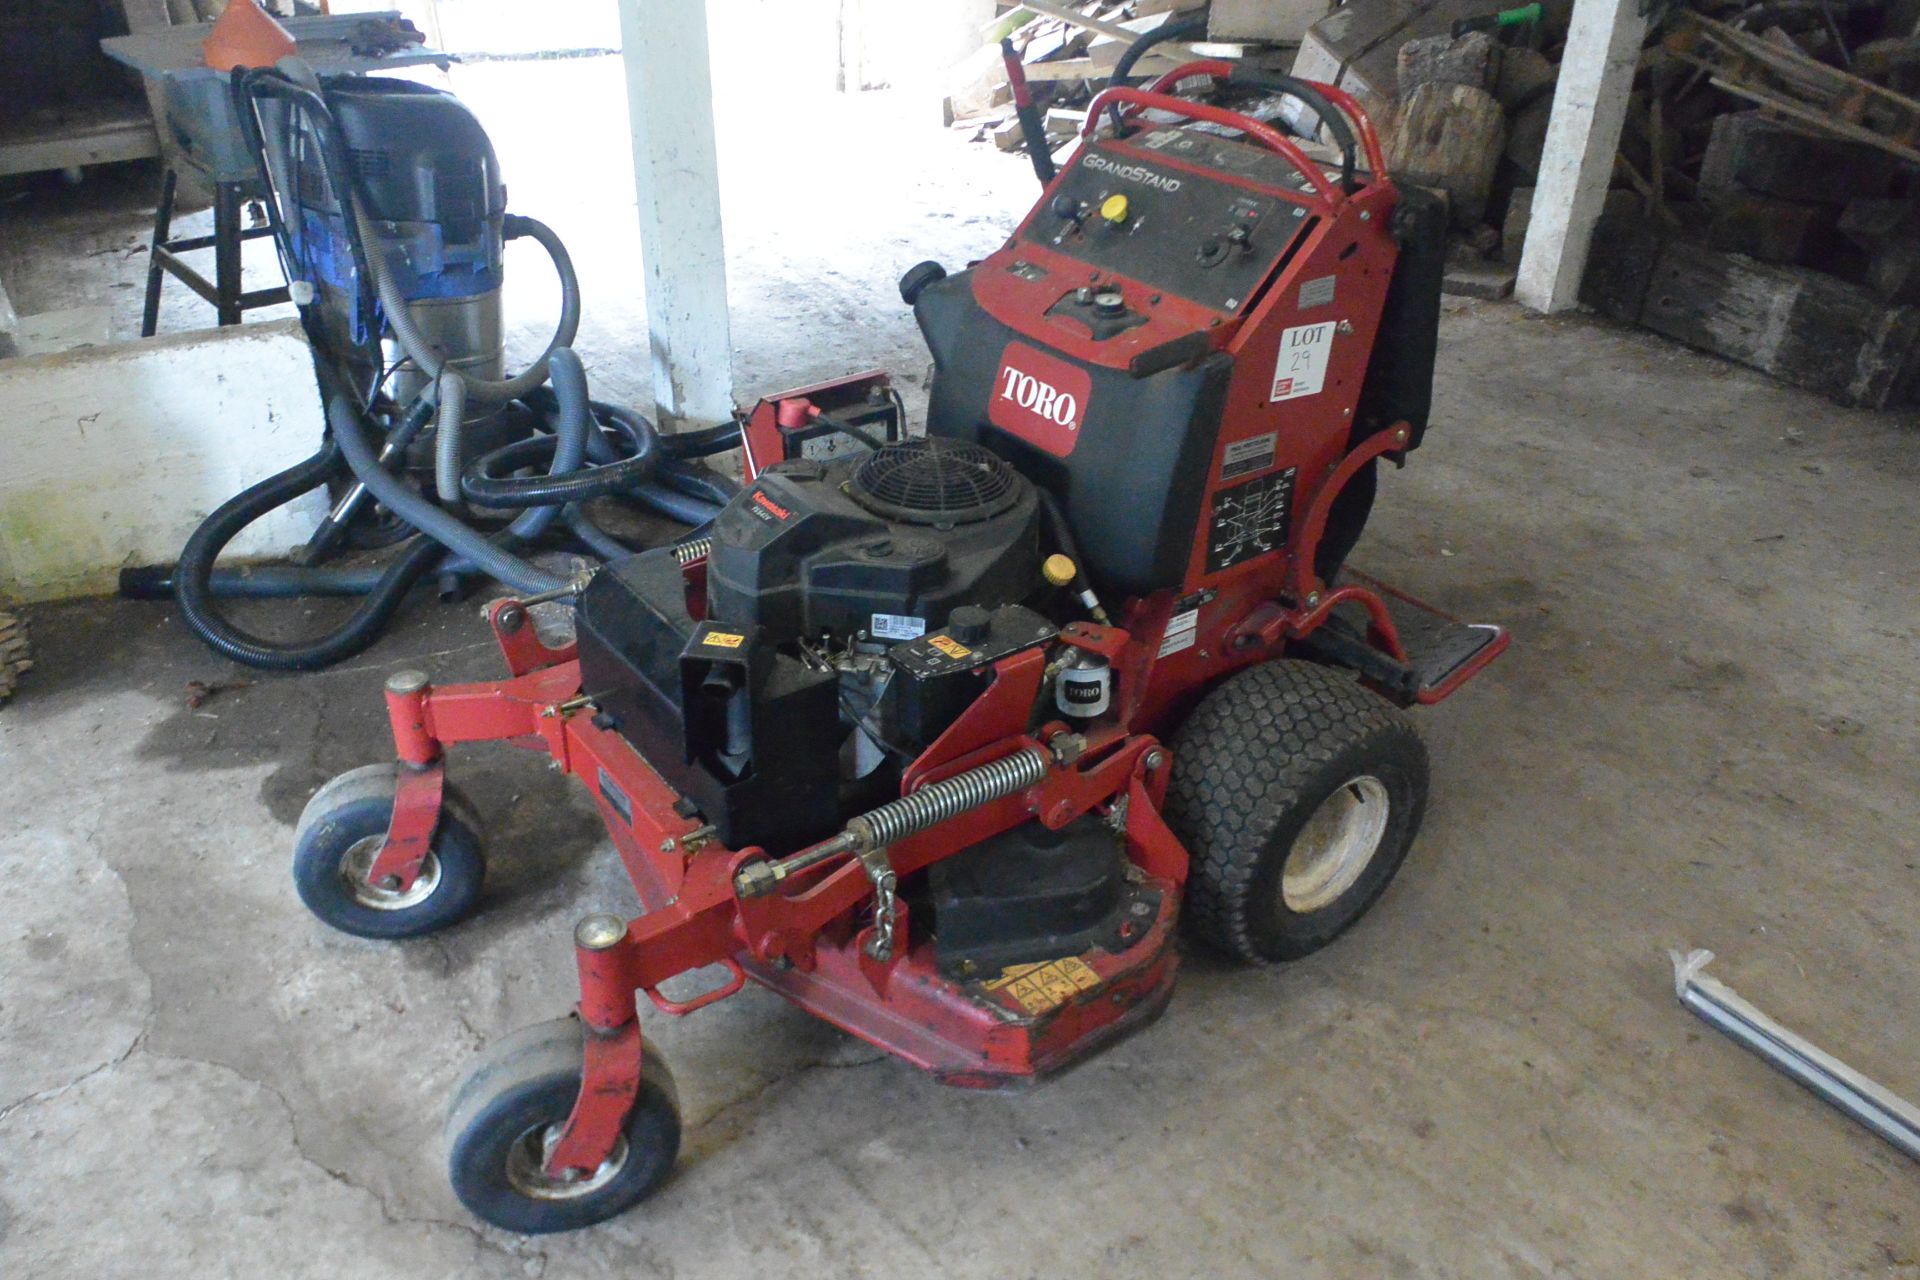 Toro compact grandstand turbo 40" stand-on side discharge mower (2018)